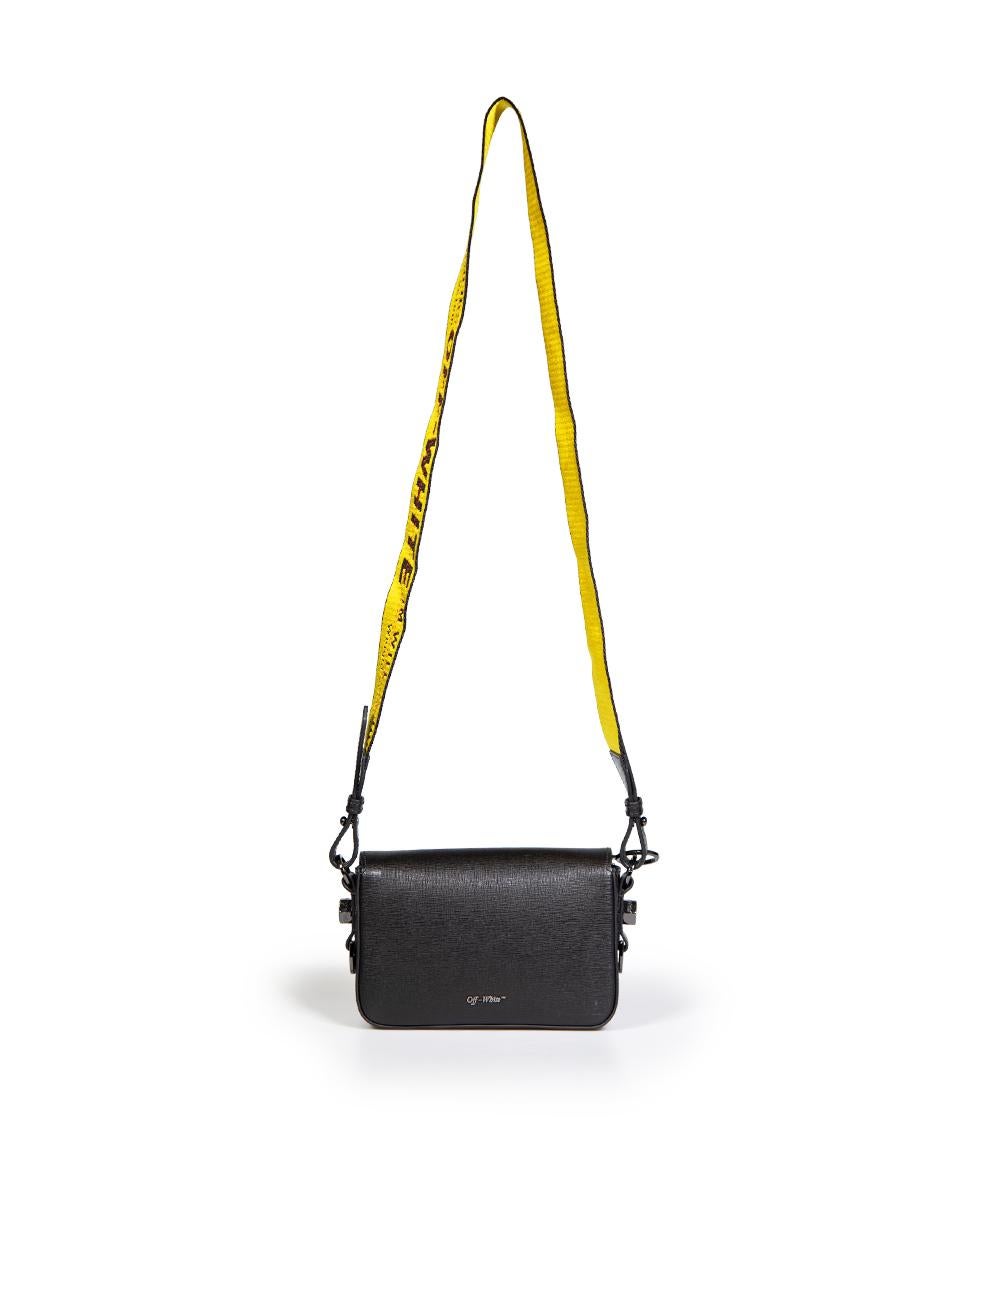 Off-White Black Saffiano Leather Sculpture Flap Crossbody Bag In Excellent Condition For Sale In London, GB